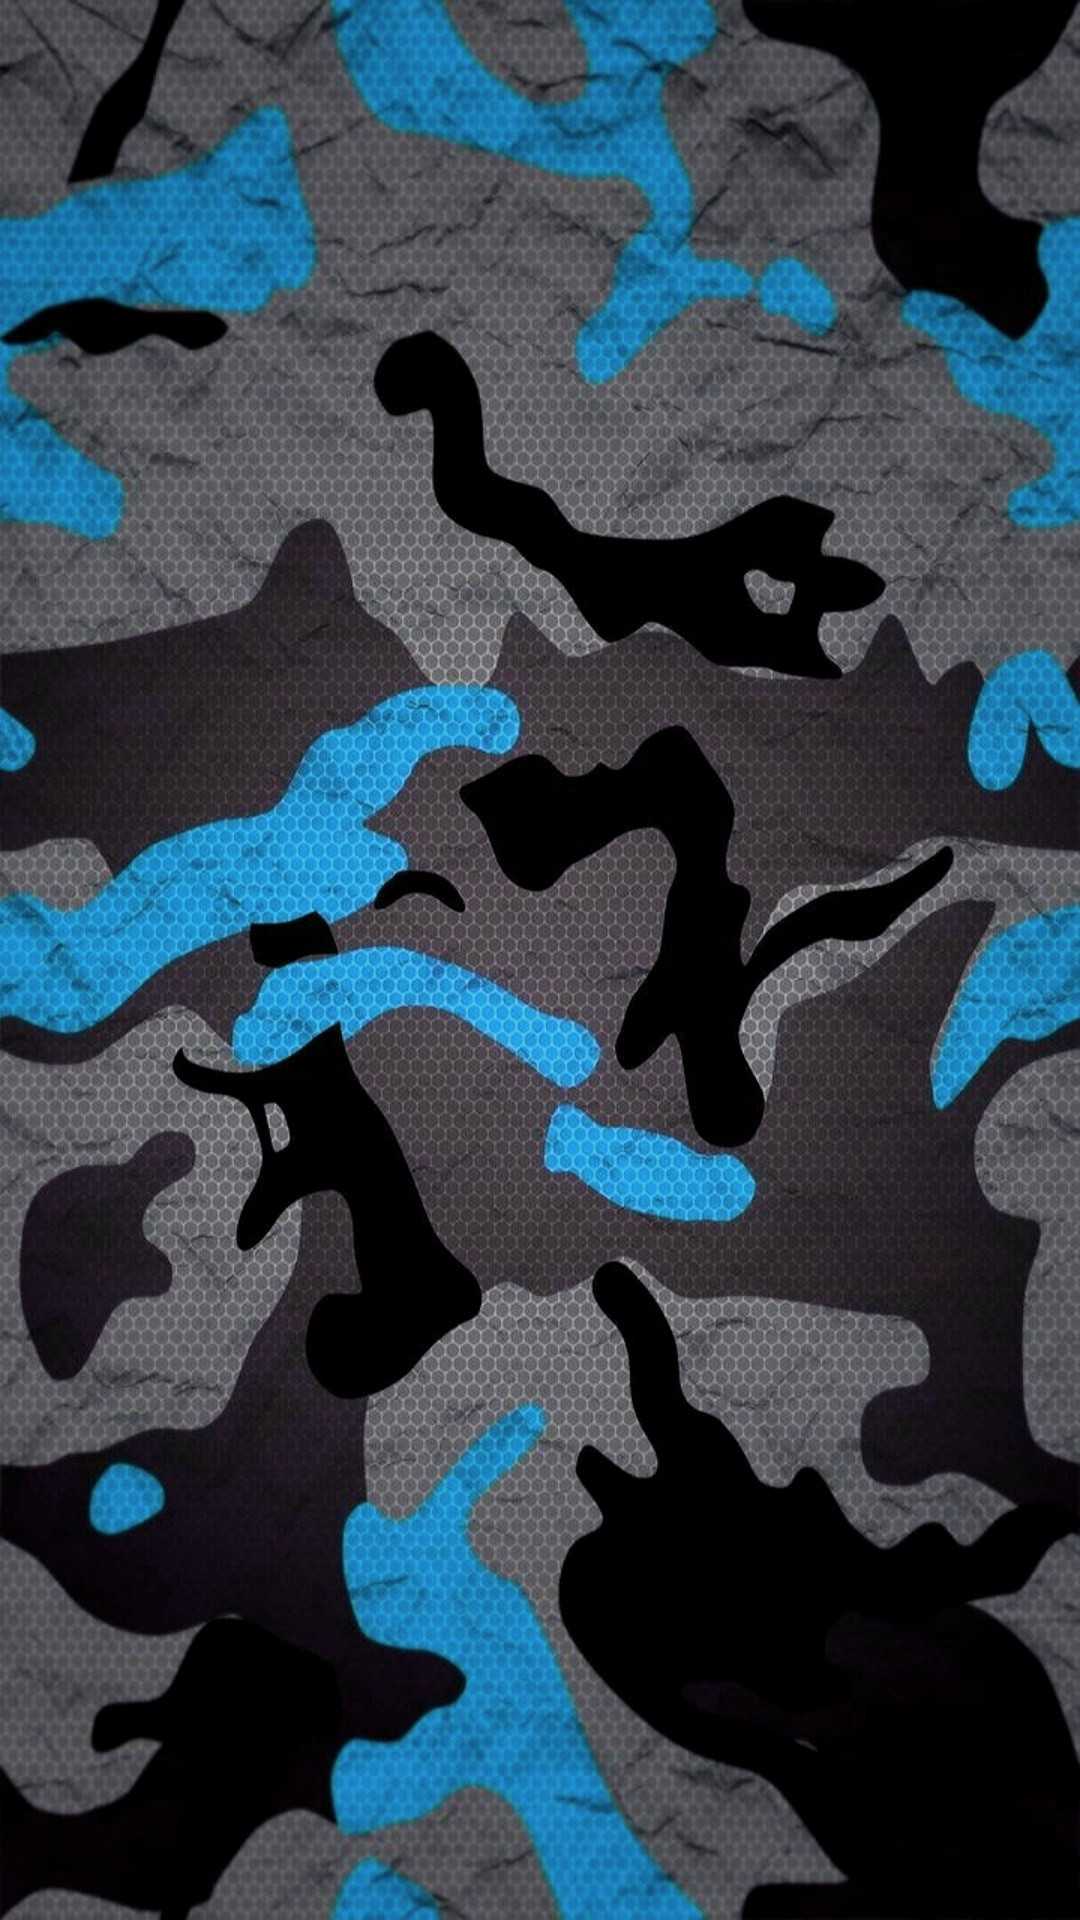 Bape Live Iphone Wallpapers